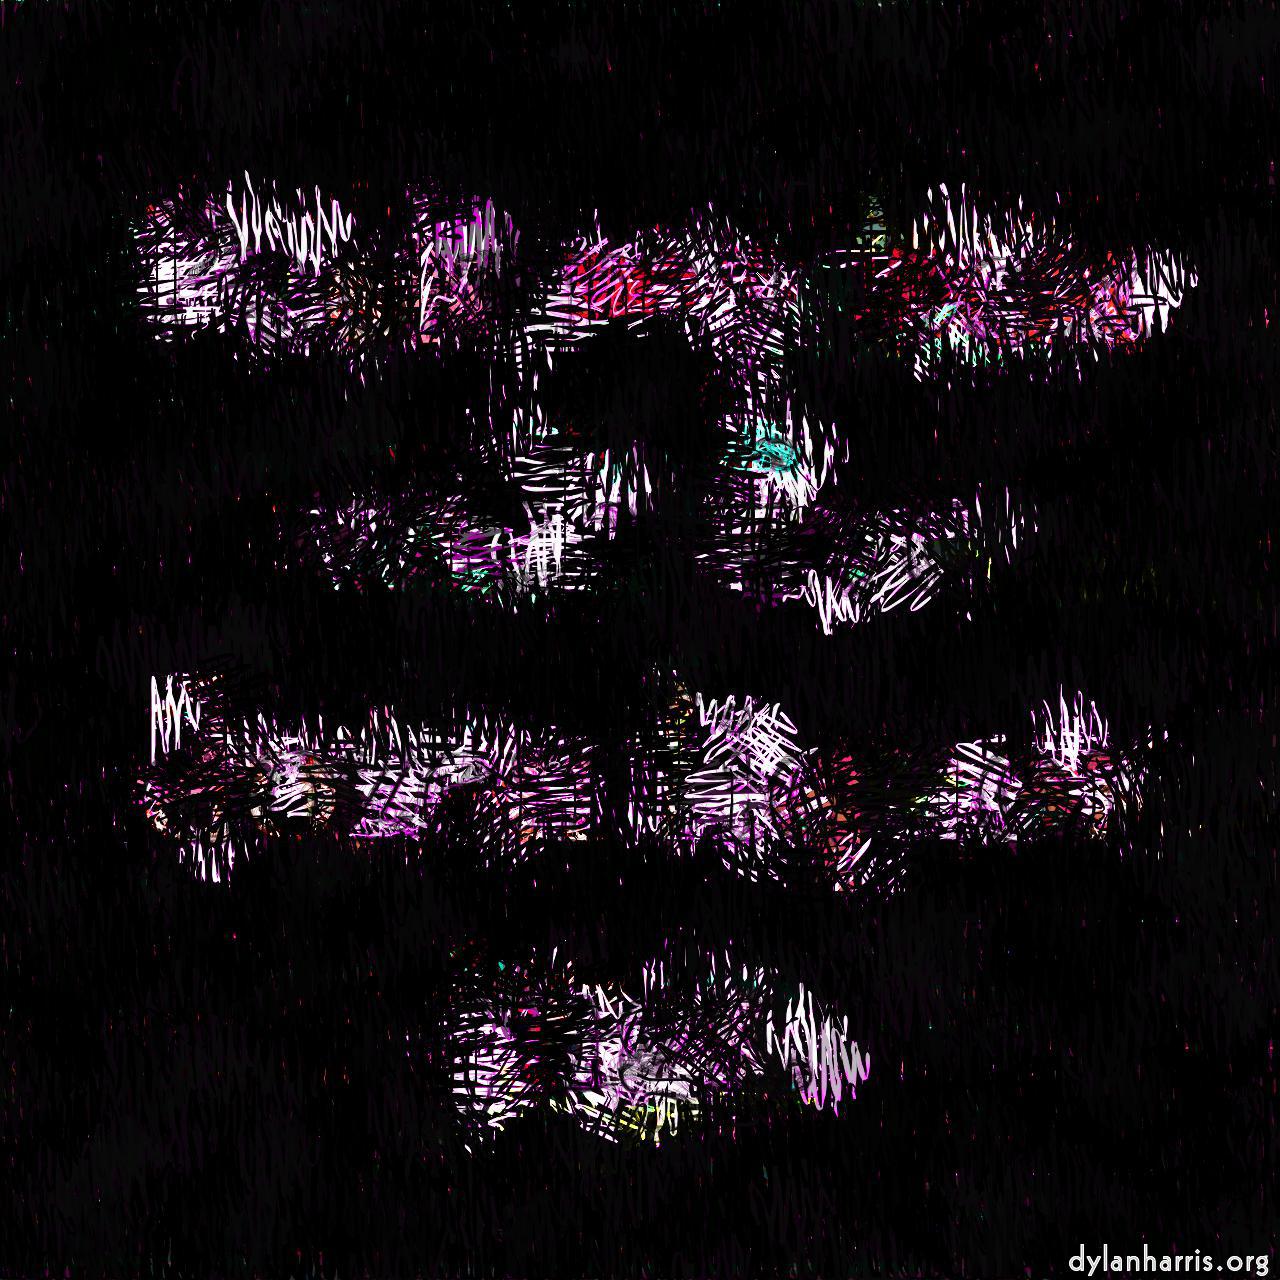 image: non-rep generative and abstract :: squiggle edging